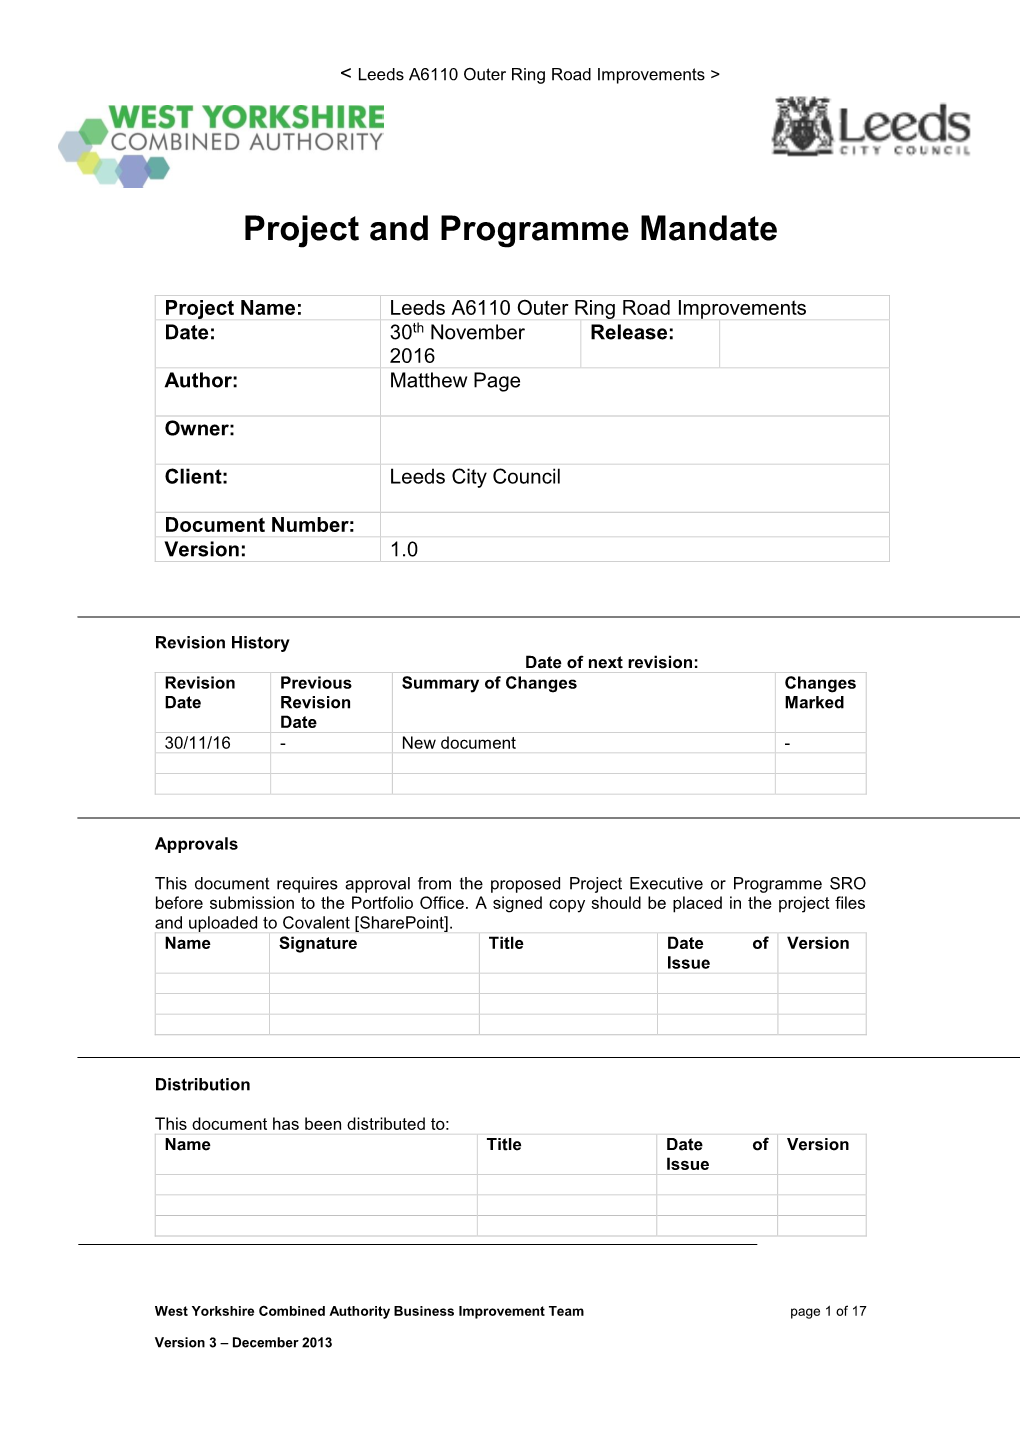 Project and Programme Mandate